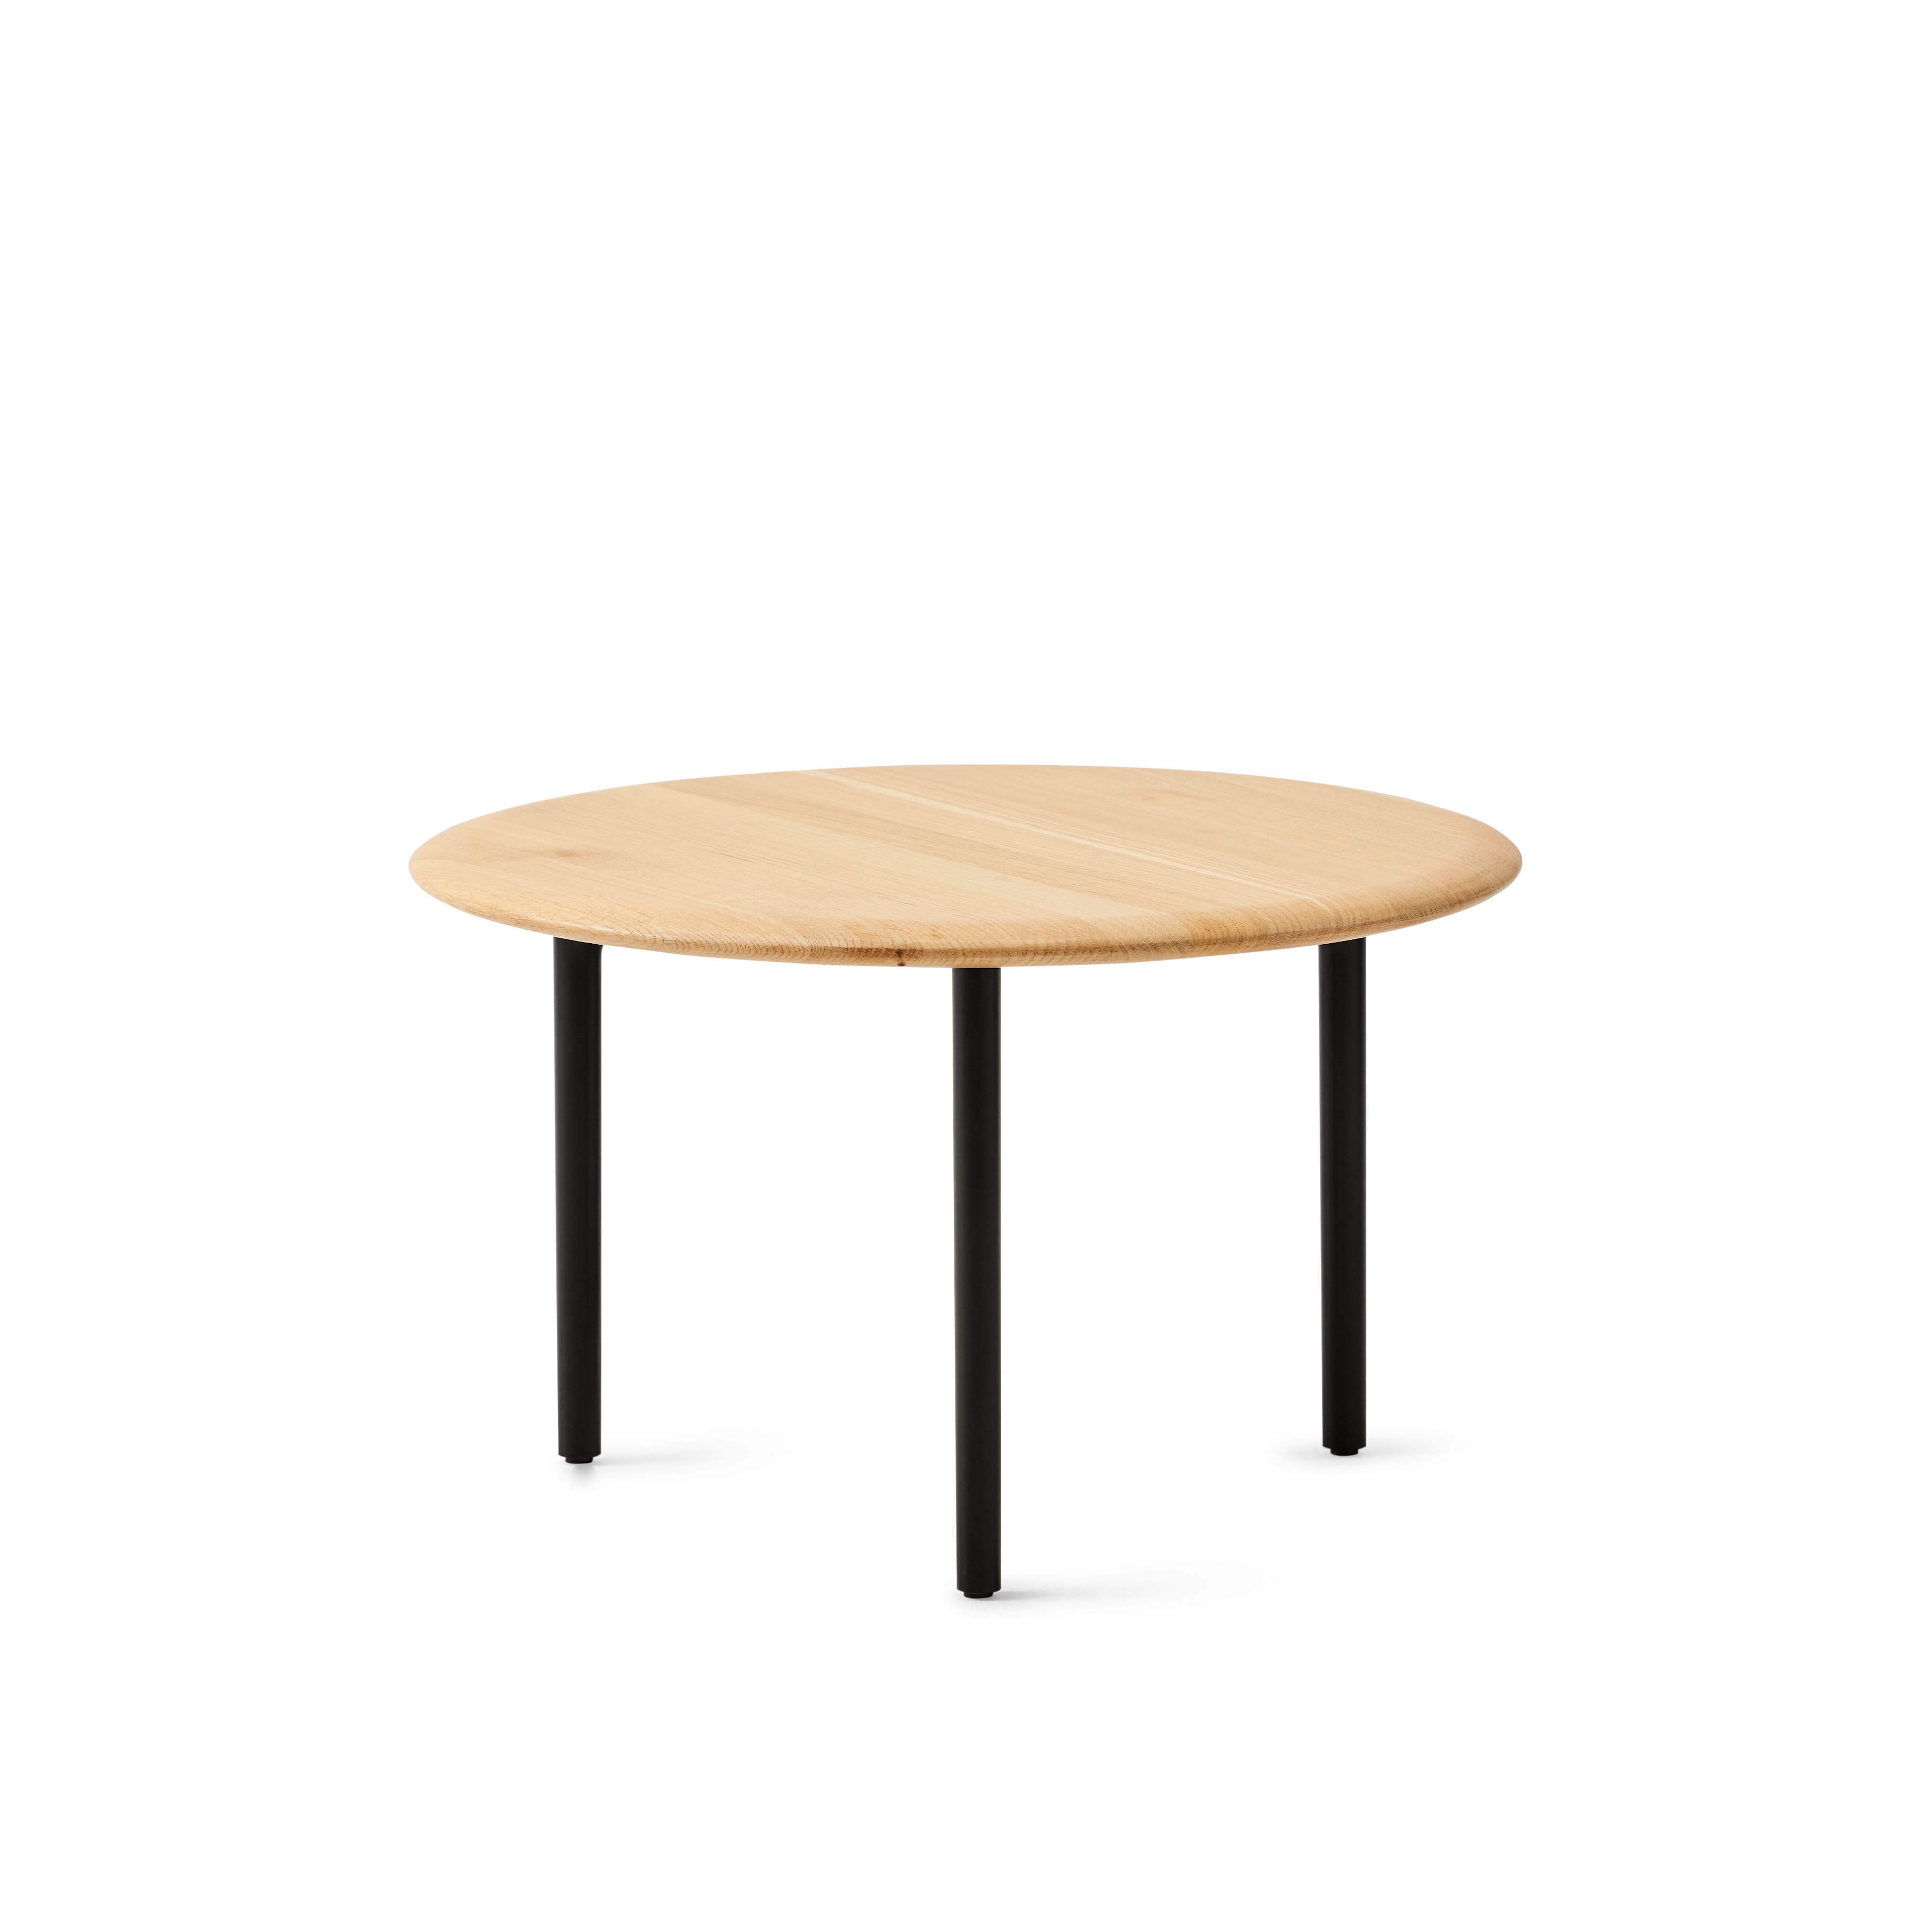 Detail front shot of Large Sprig Table with wood top and black base